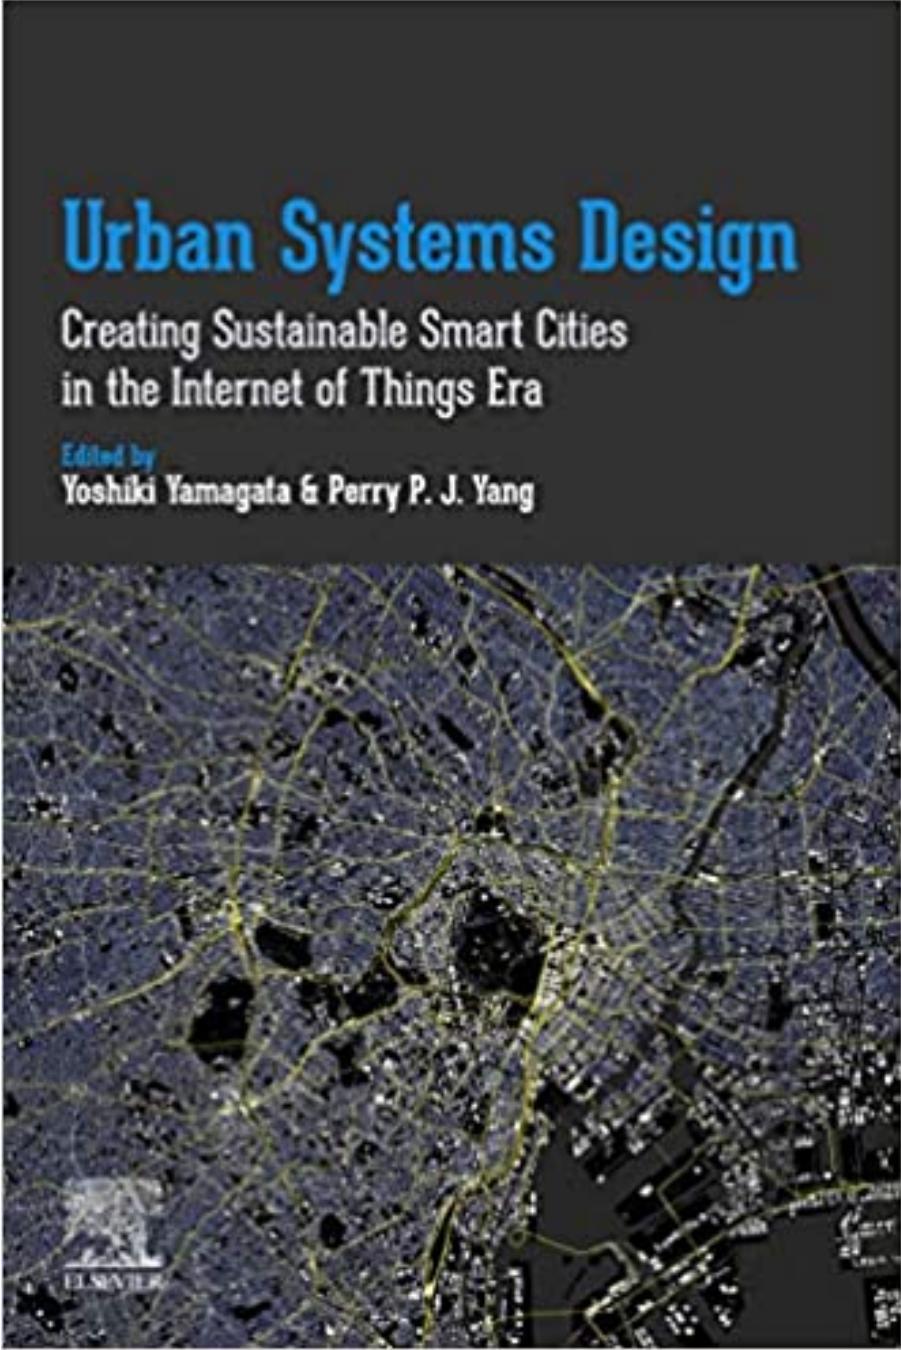 (eBook PDF)Urban Systems Design: Creating Sustainable Smart Cities in the Internet of Things Era by Yoshiki Yamagata,Perry P. J. Yang